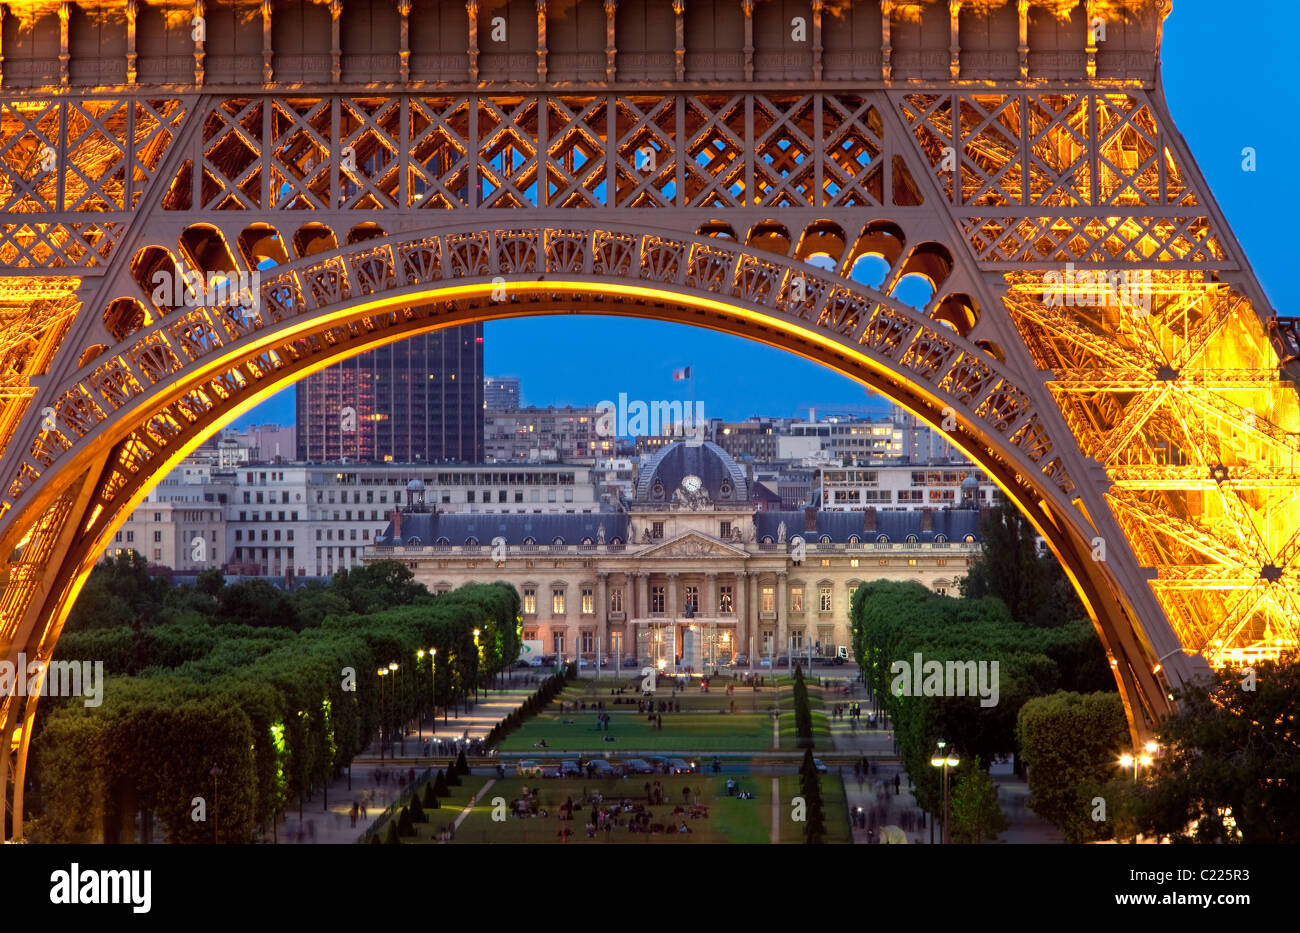 Eiffel Tower with Ecole Militaire beyond at night, Paris France Stock Photo